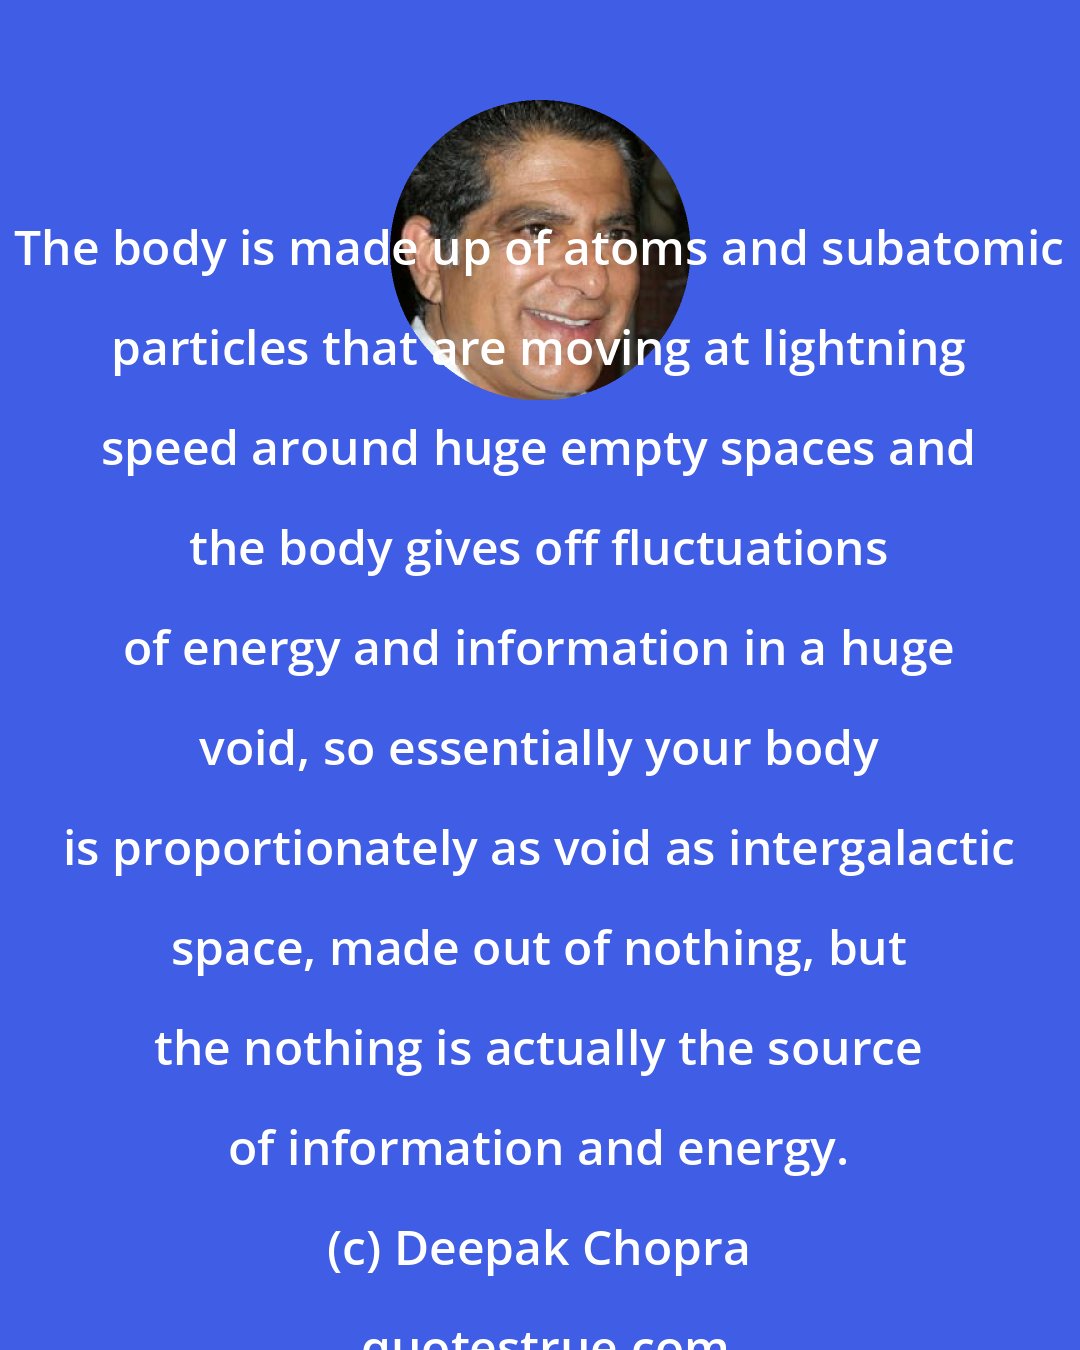 Deepak Chopra: The body is made up of atoms and subatomic particles that are moving at lightning speed around huge empty spaces and the body gives off fluctuations of energy and information in a huge void, so essentially your body is proportionately as void as intergalactic space, made out of nothing, but the nothing is actually the source of information and energy.